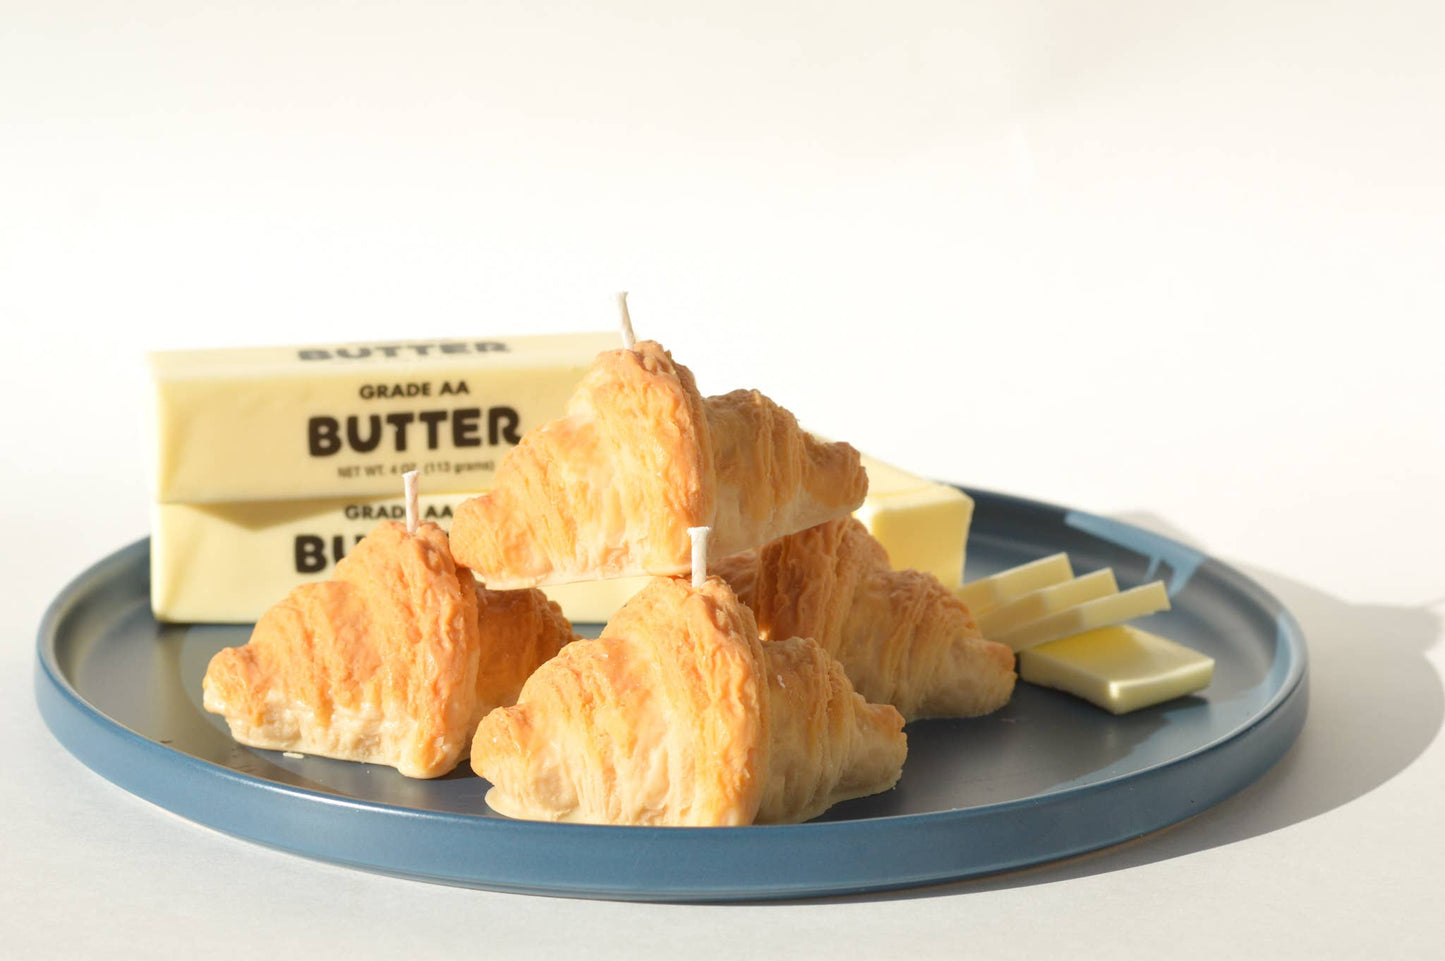 Pile of four croissant candles on a plate next to slabs of butter.